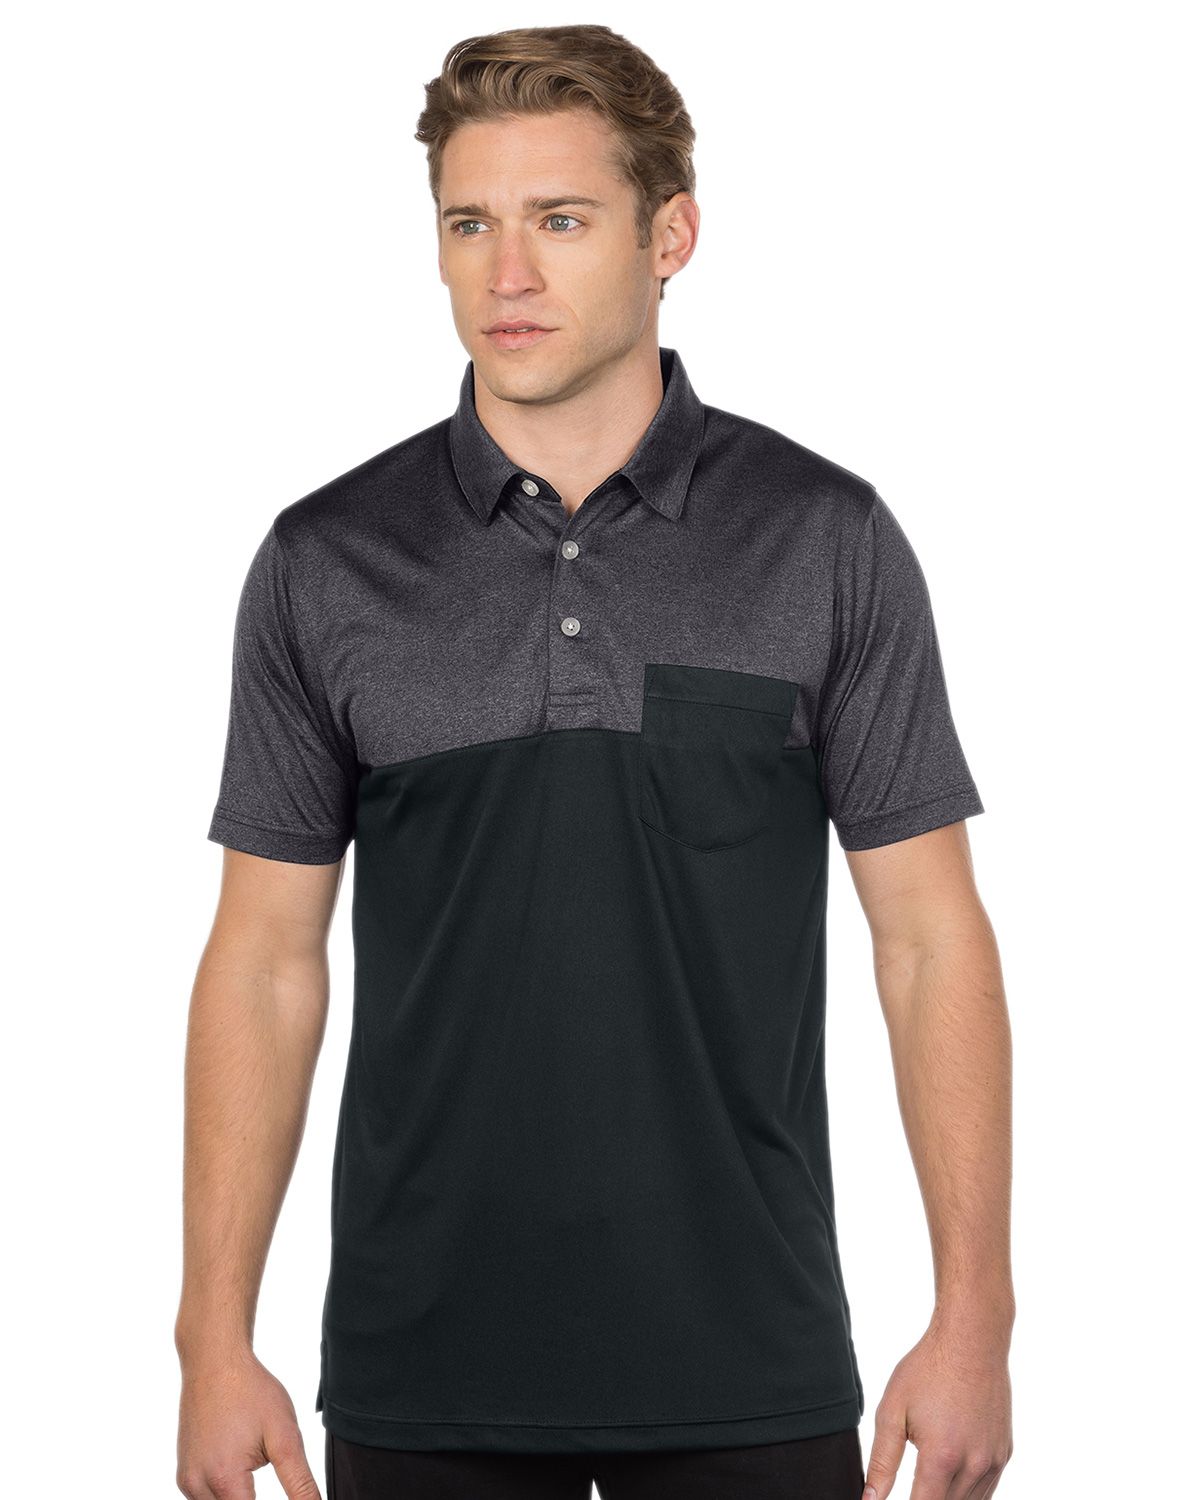 Tri-Mountain Gold K211 Mens Pocketed Colorblock Polo